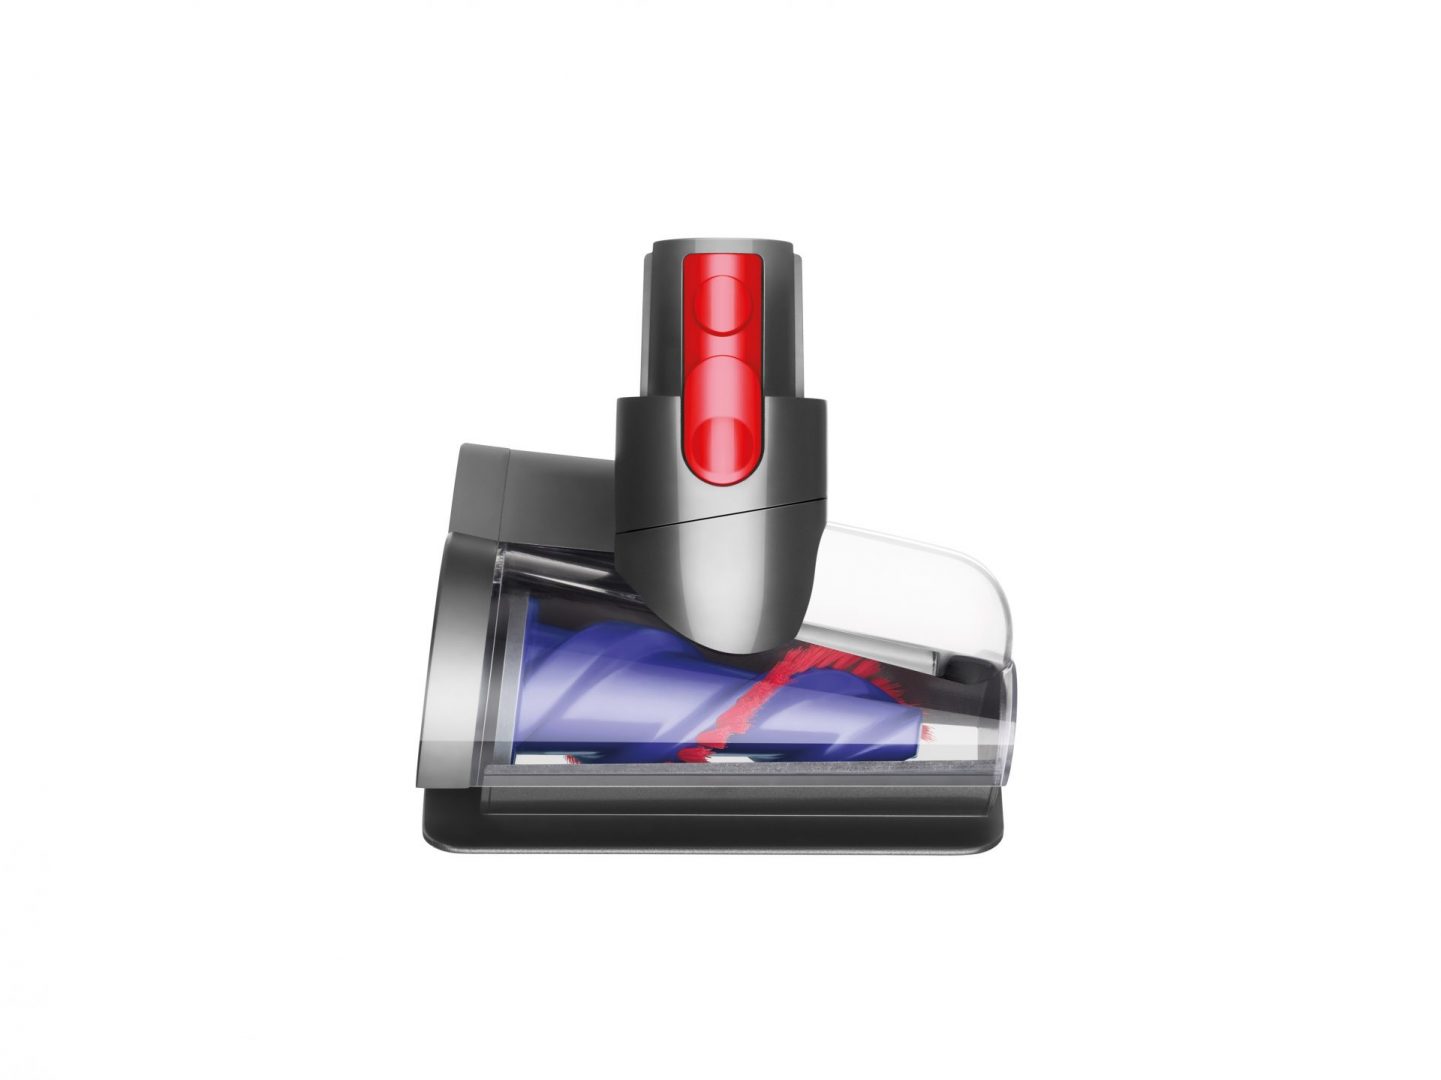 Dyson’s Latest Cordless Vacuum Leaves Others In The Dust